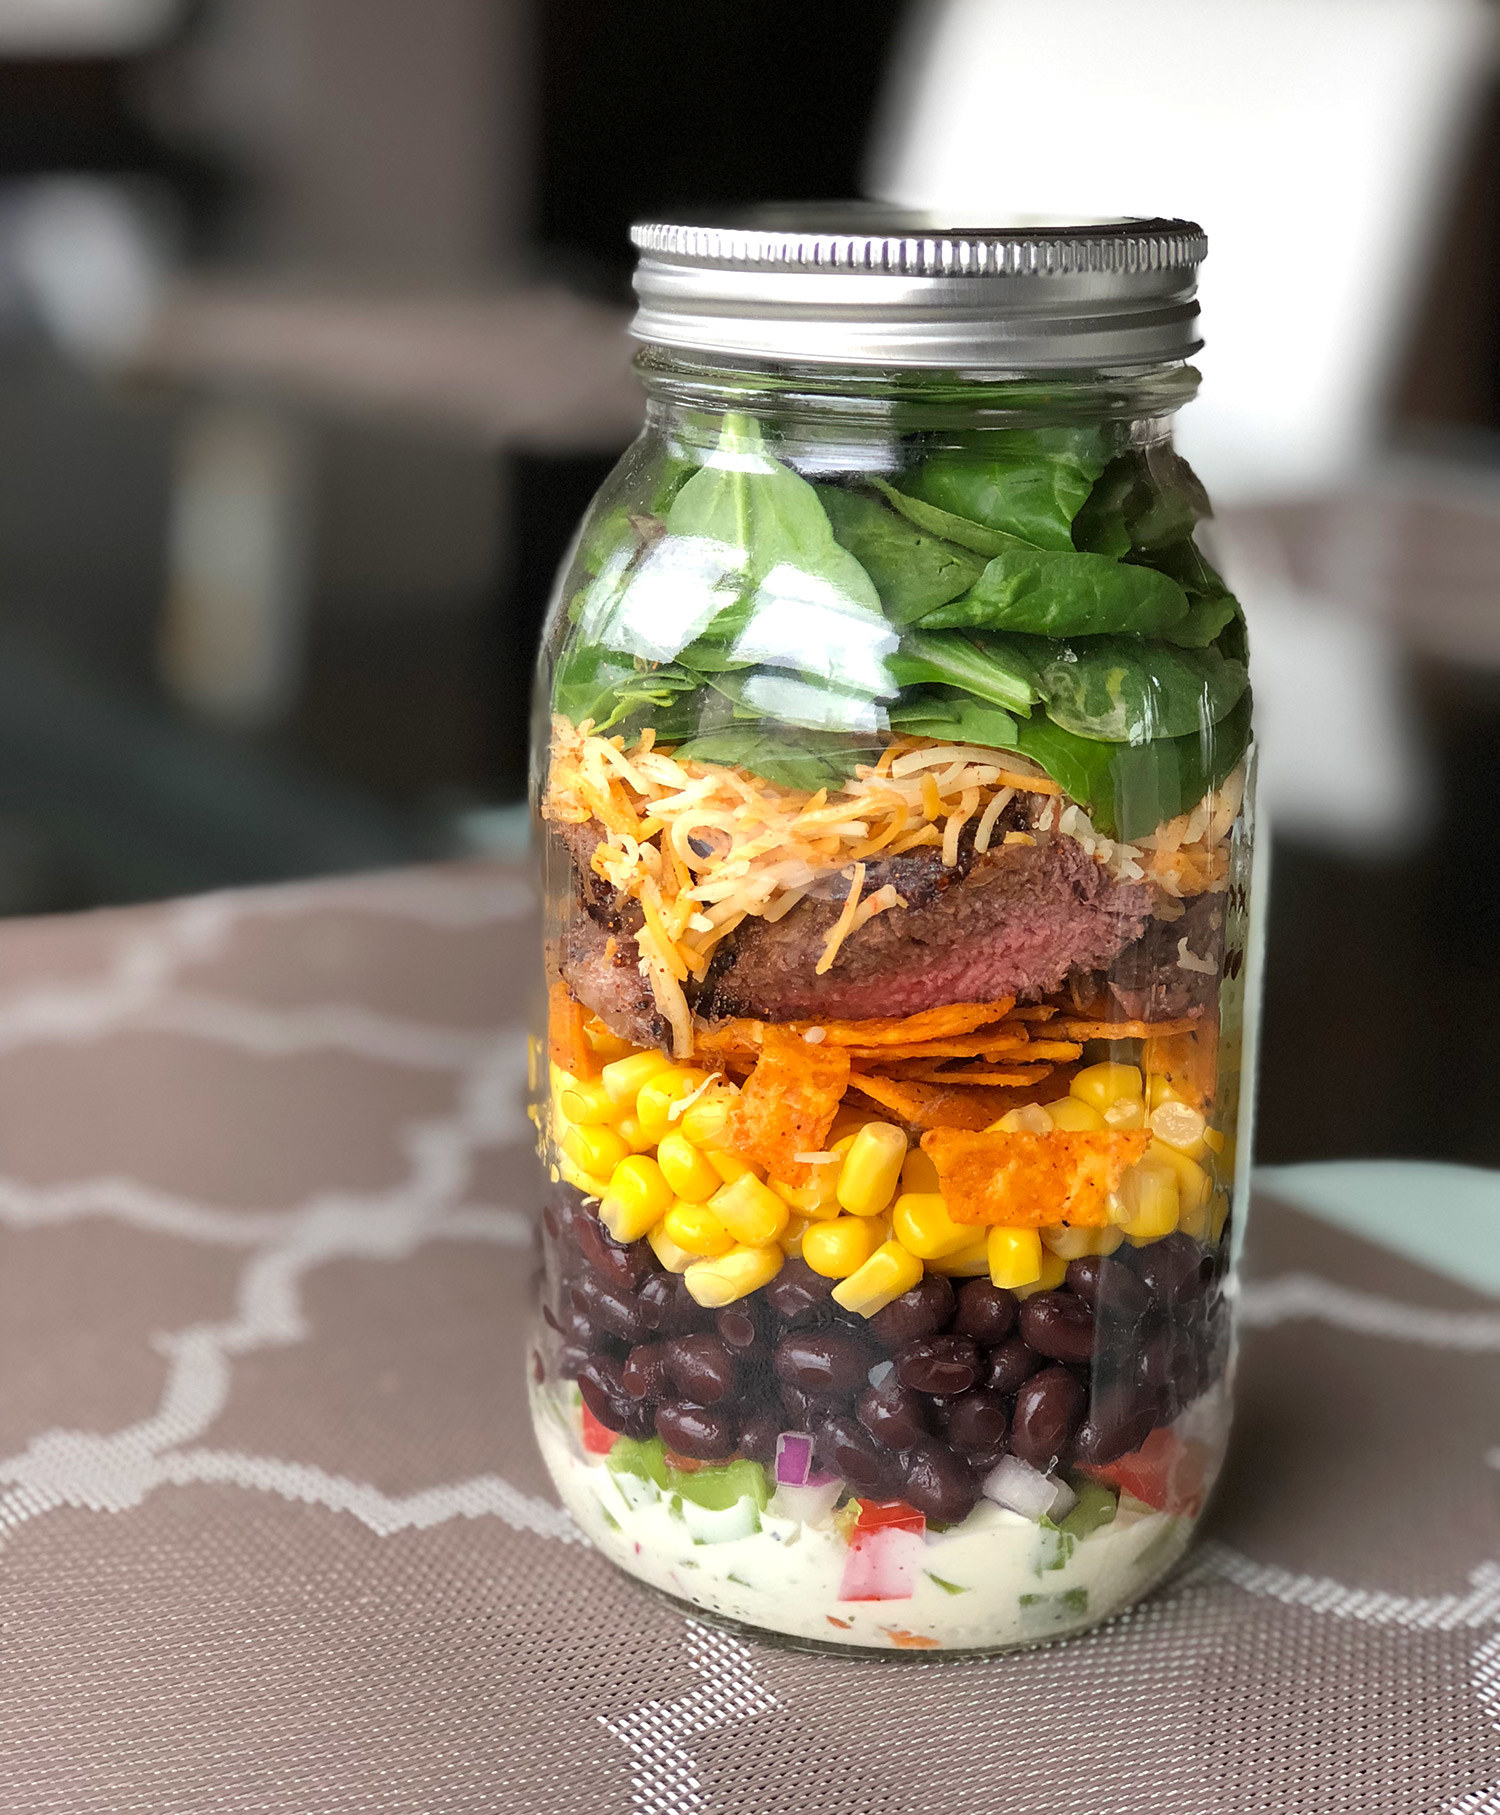 A close up of a neatly layered Tex Mex style salad in a mason jar